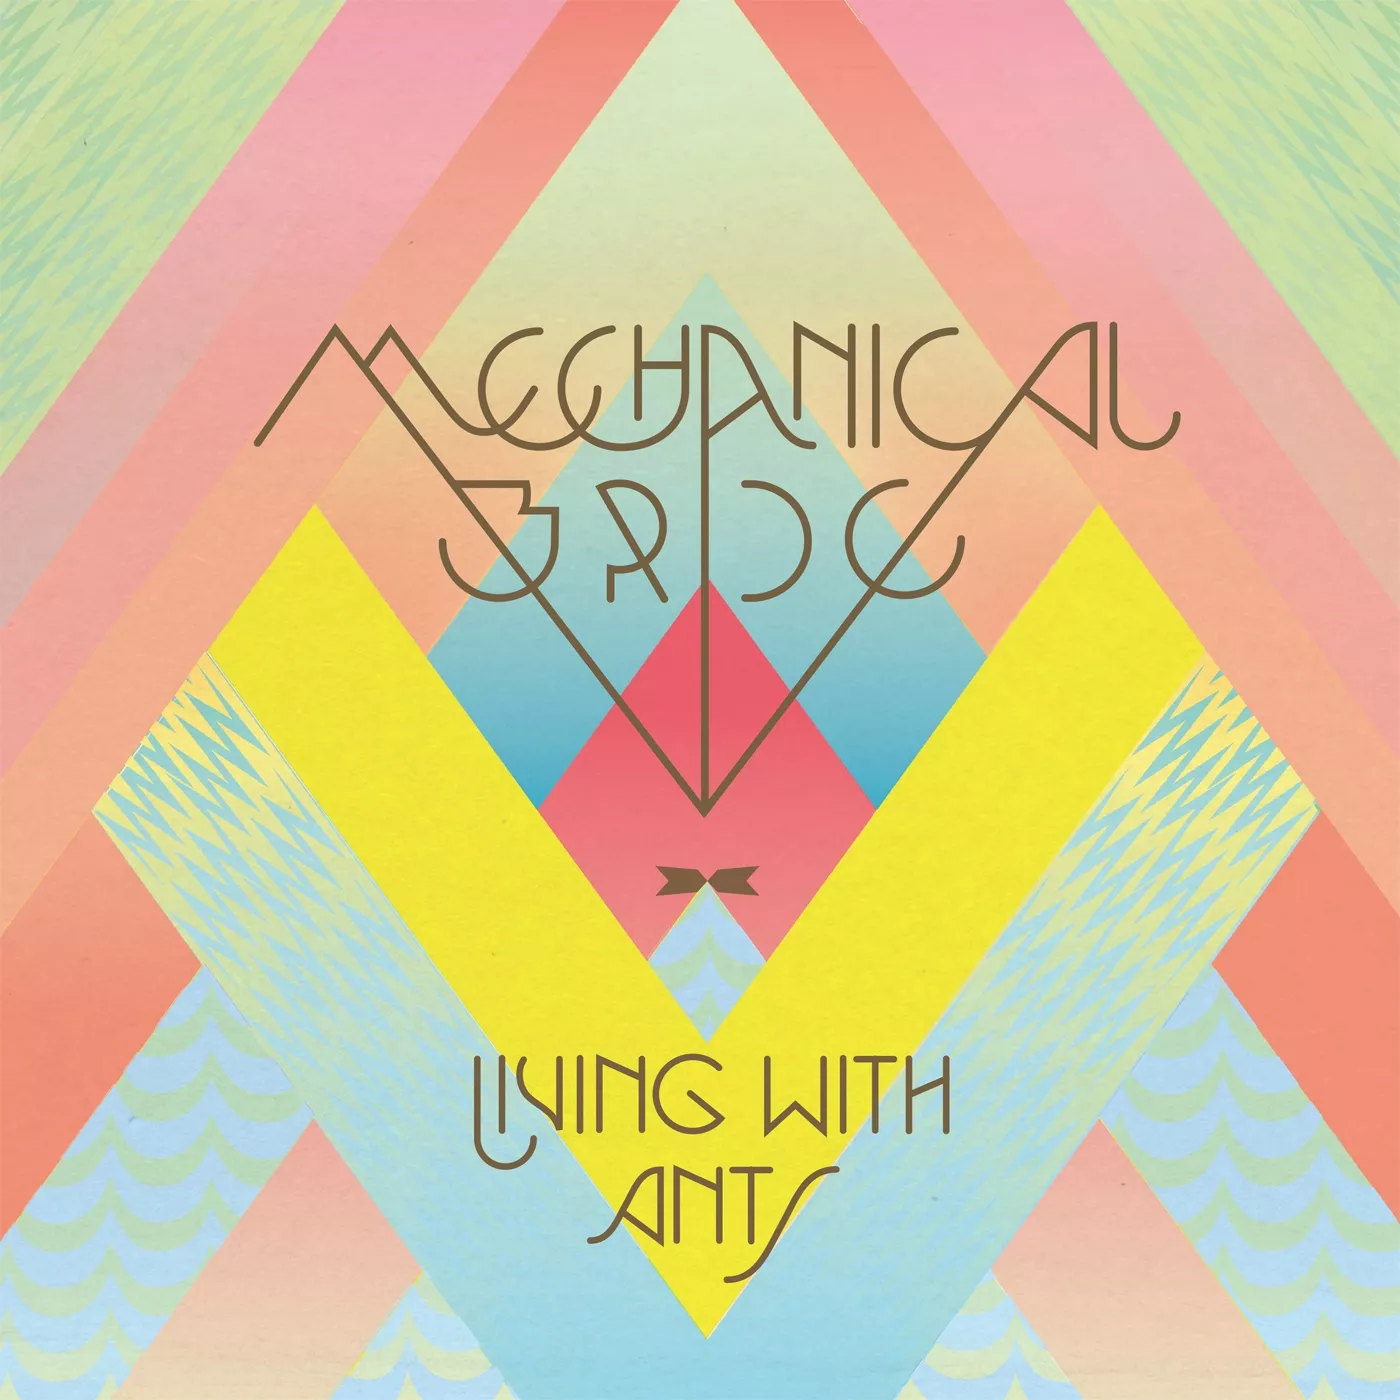 Living With Ants - Mechanical Bride